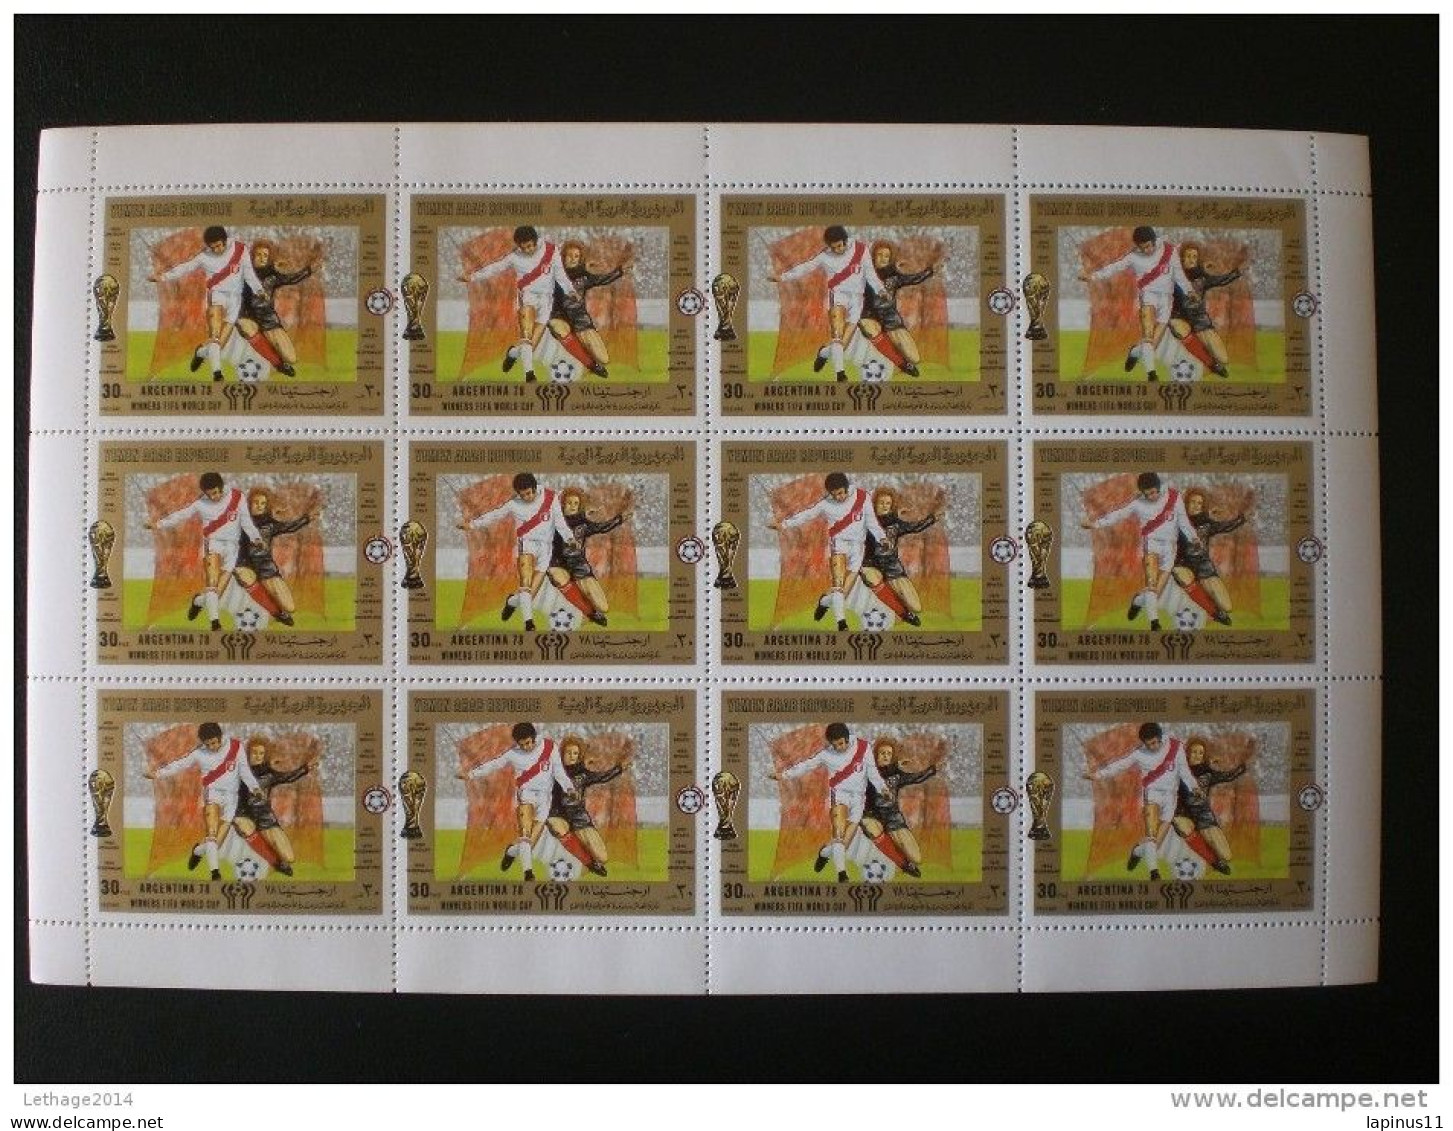 Yemen Rep."Argentina 78" Football World 12 Complete Mint Sets Never Hunting,complet,and 2 Block +9 PHOTO - Unused Stamps